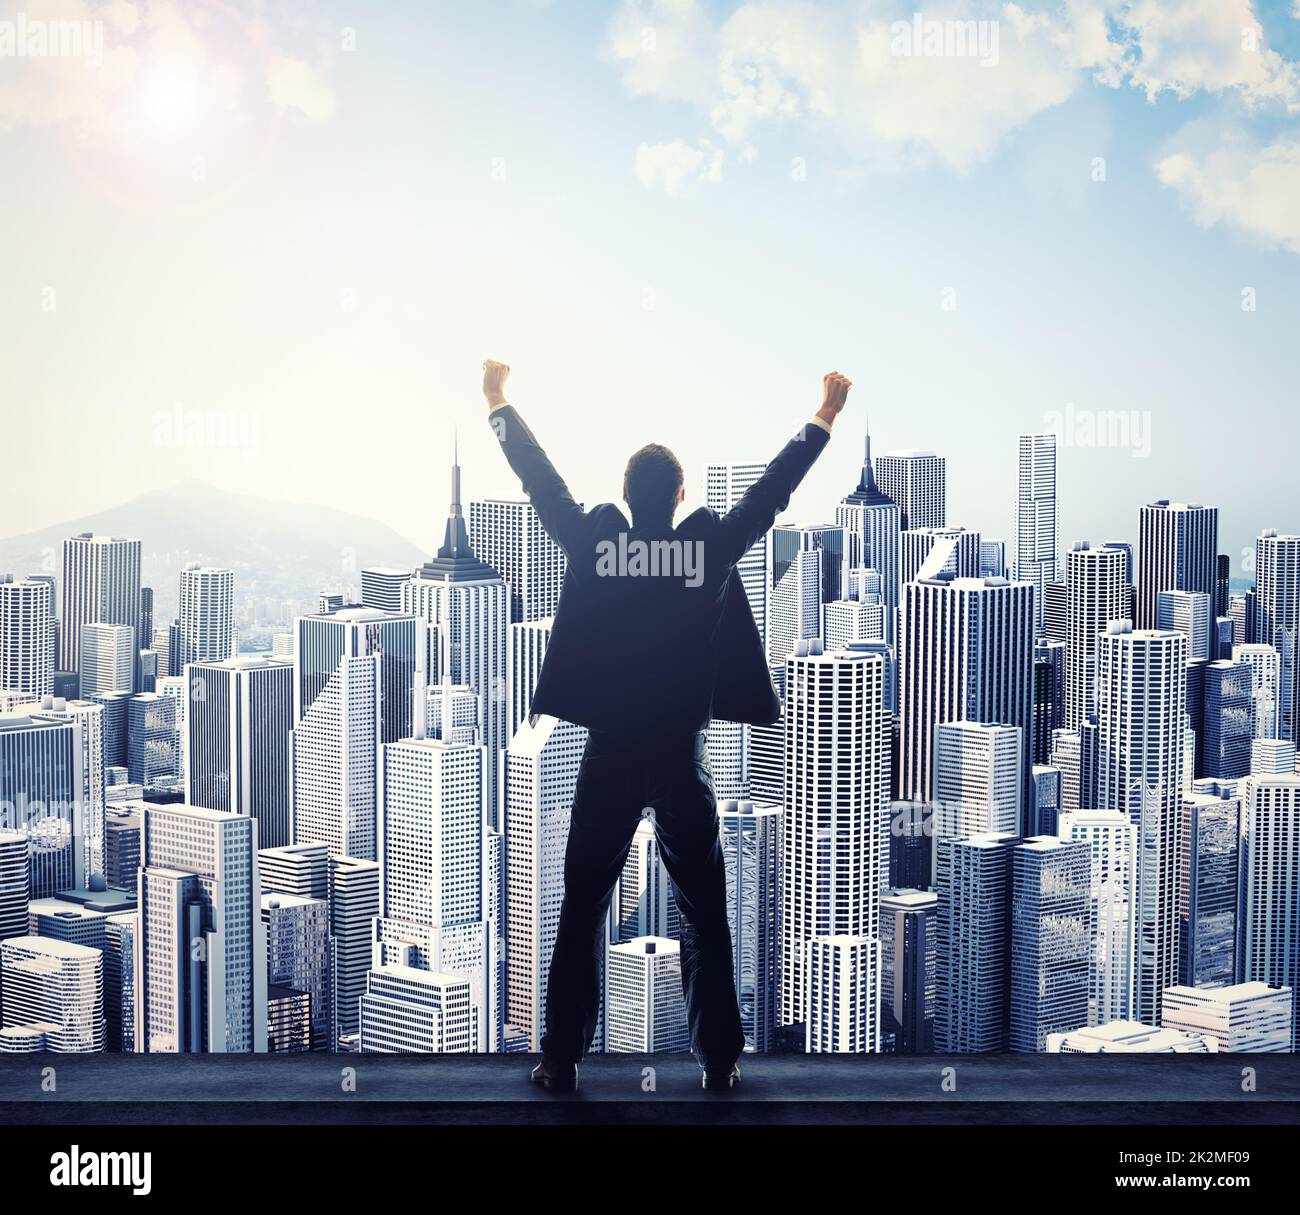 Ive finally made it. Rear view of a businessman with his arms raised while looking at a cityscape. Stock Photo